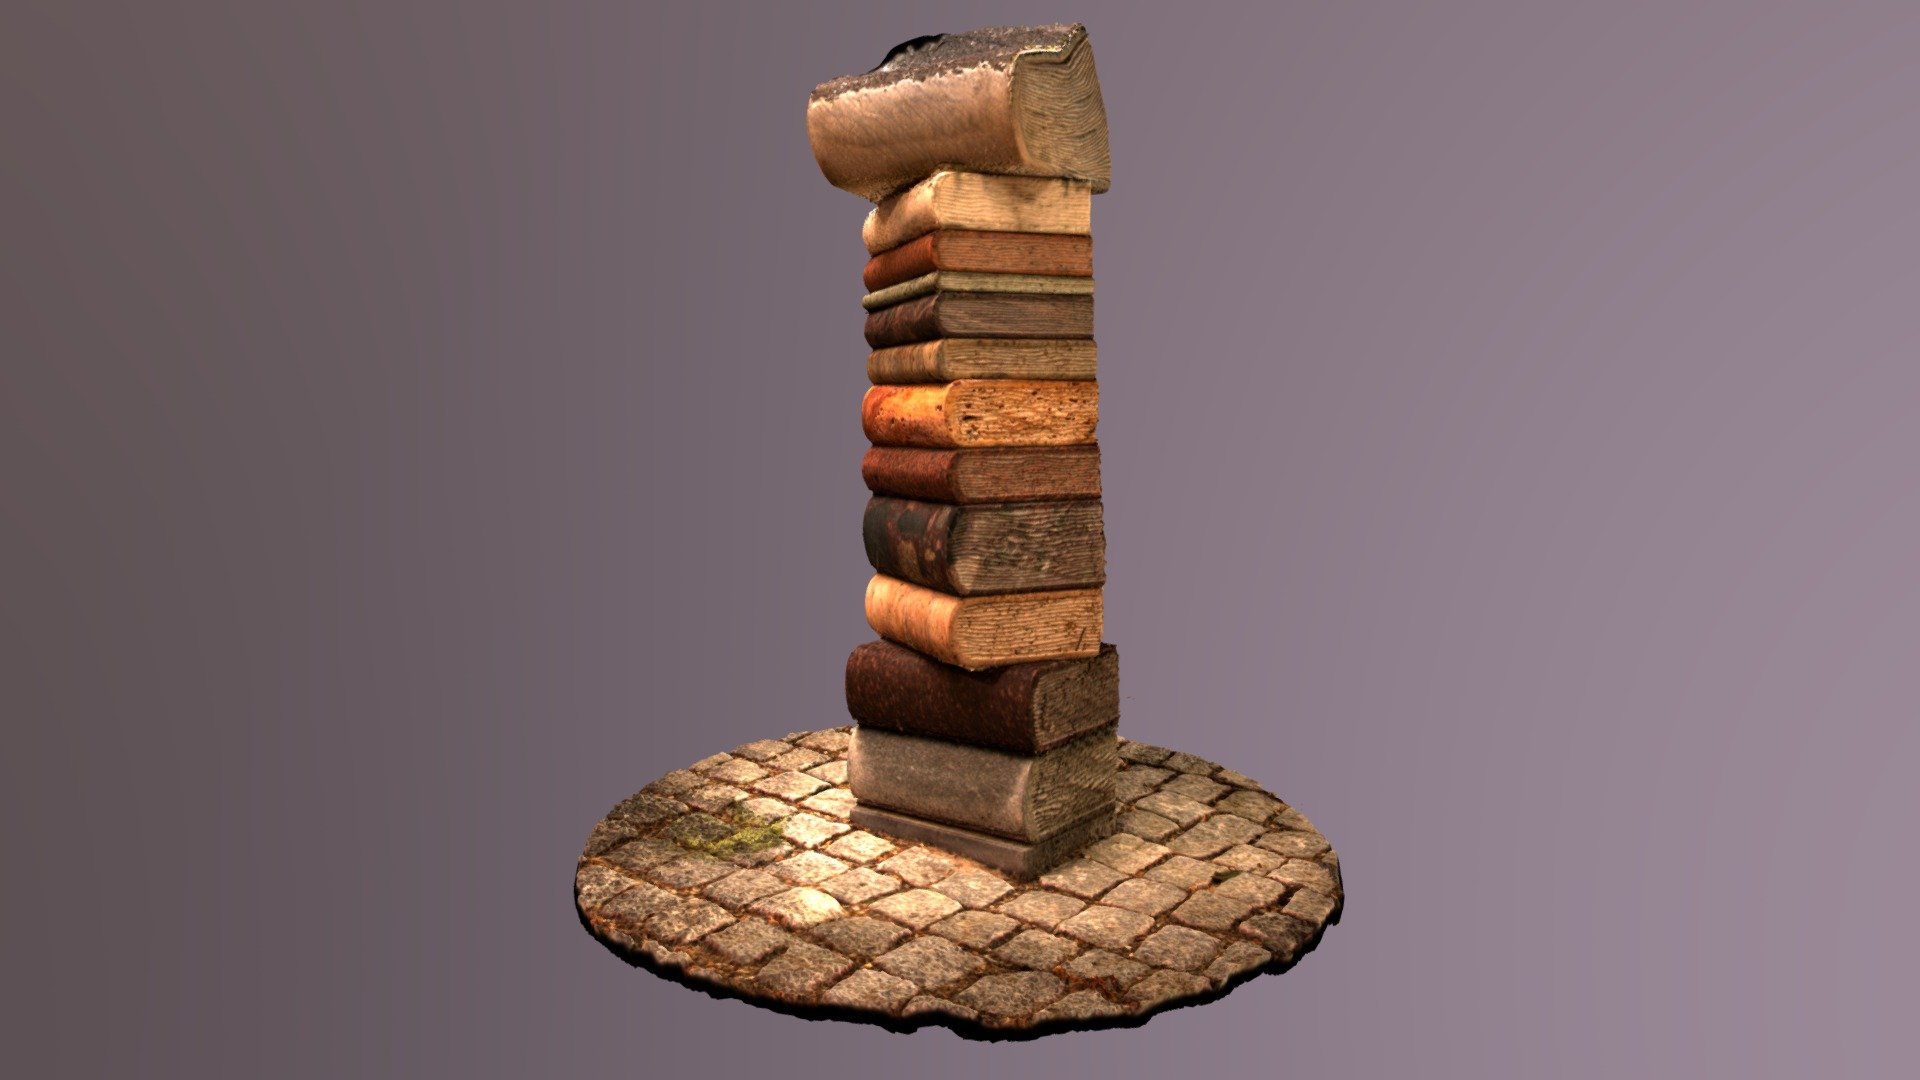 The Pile of Stone Books